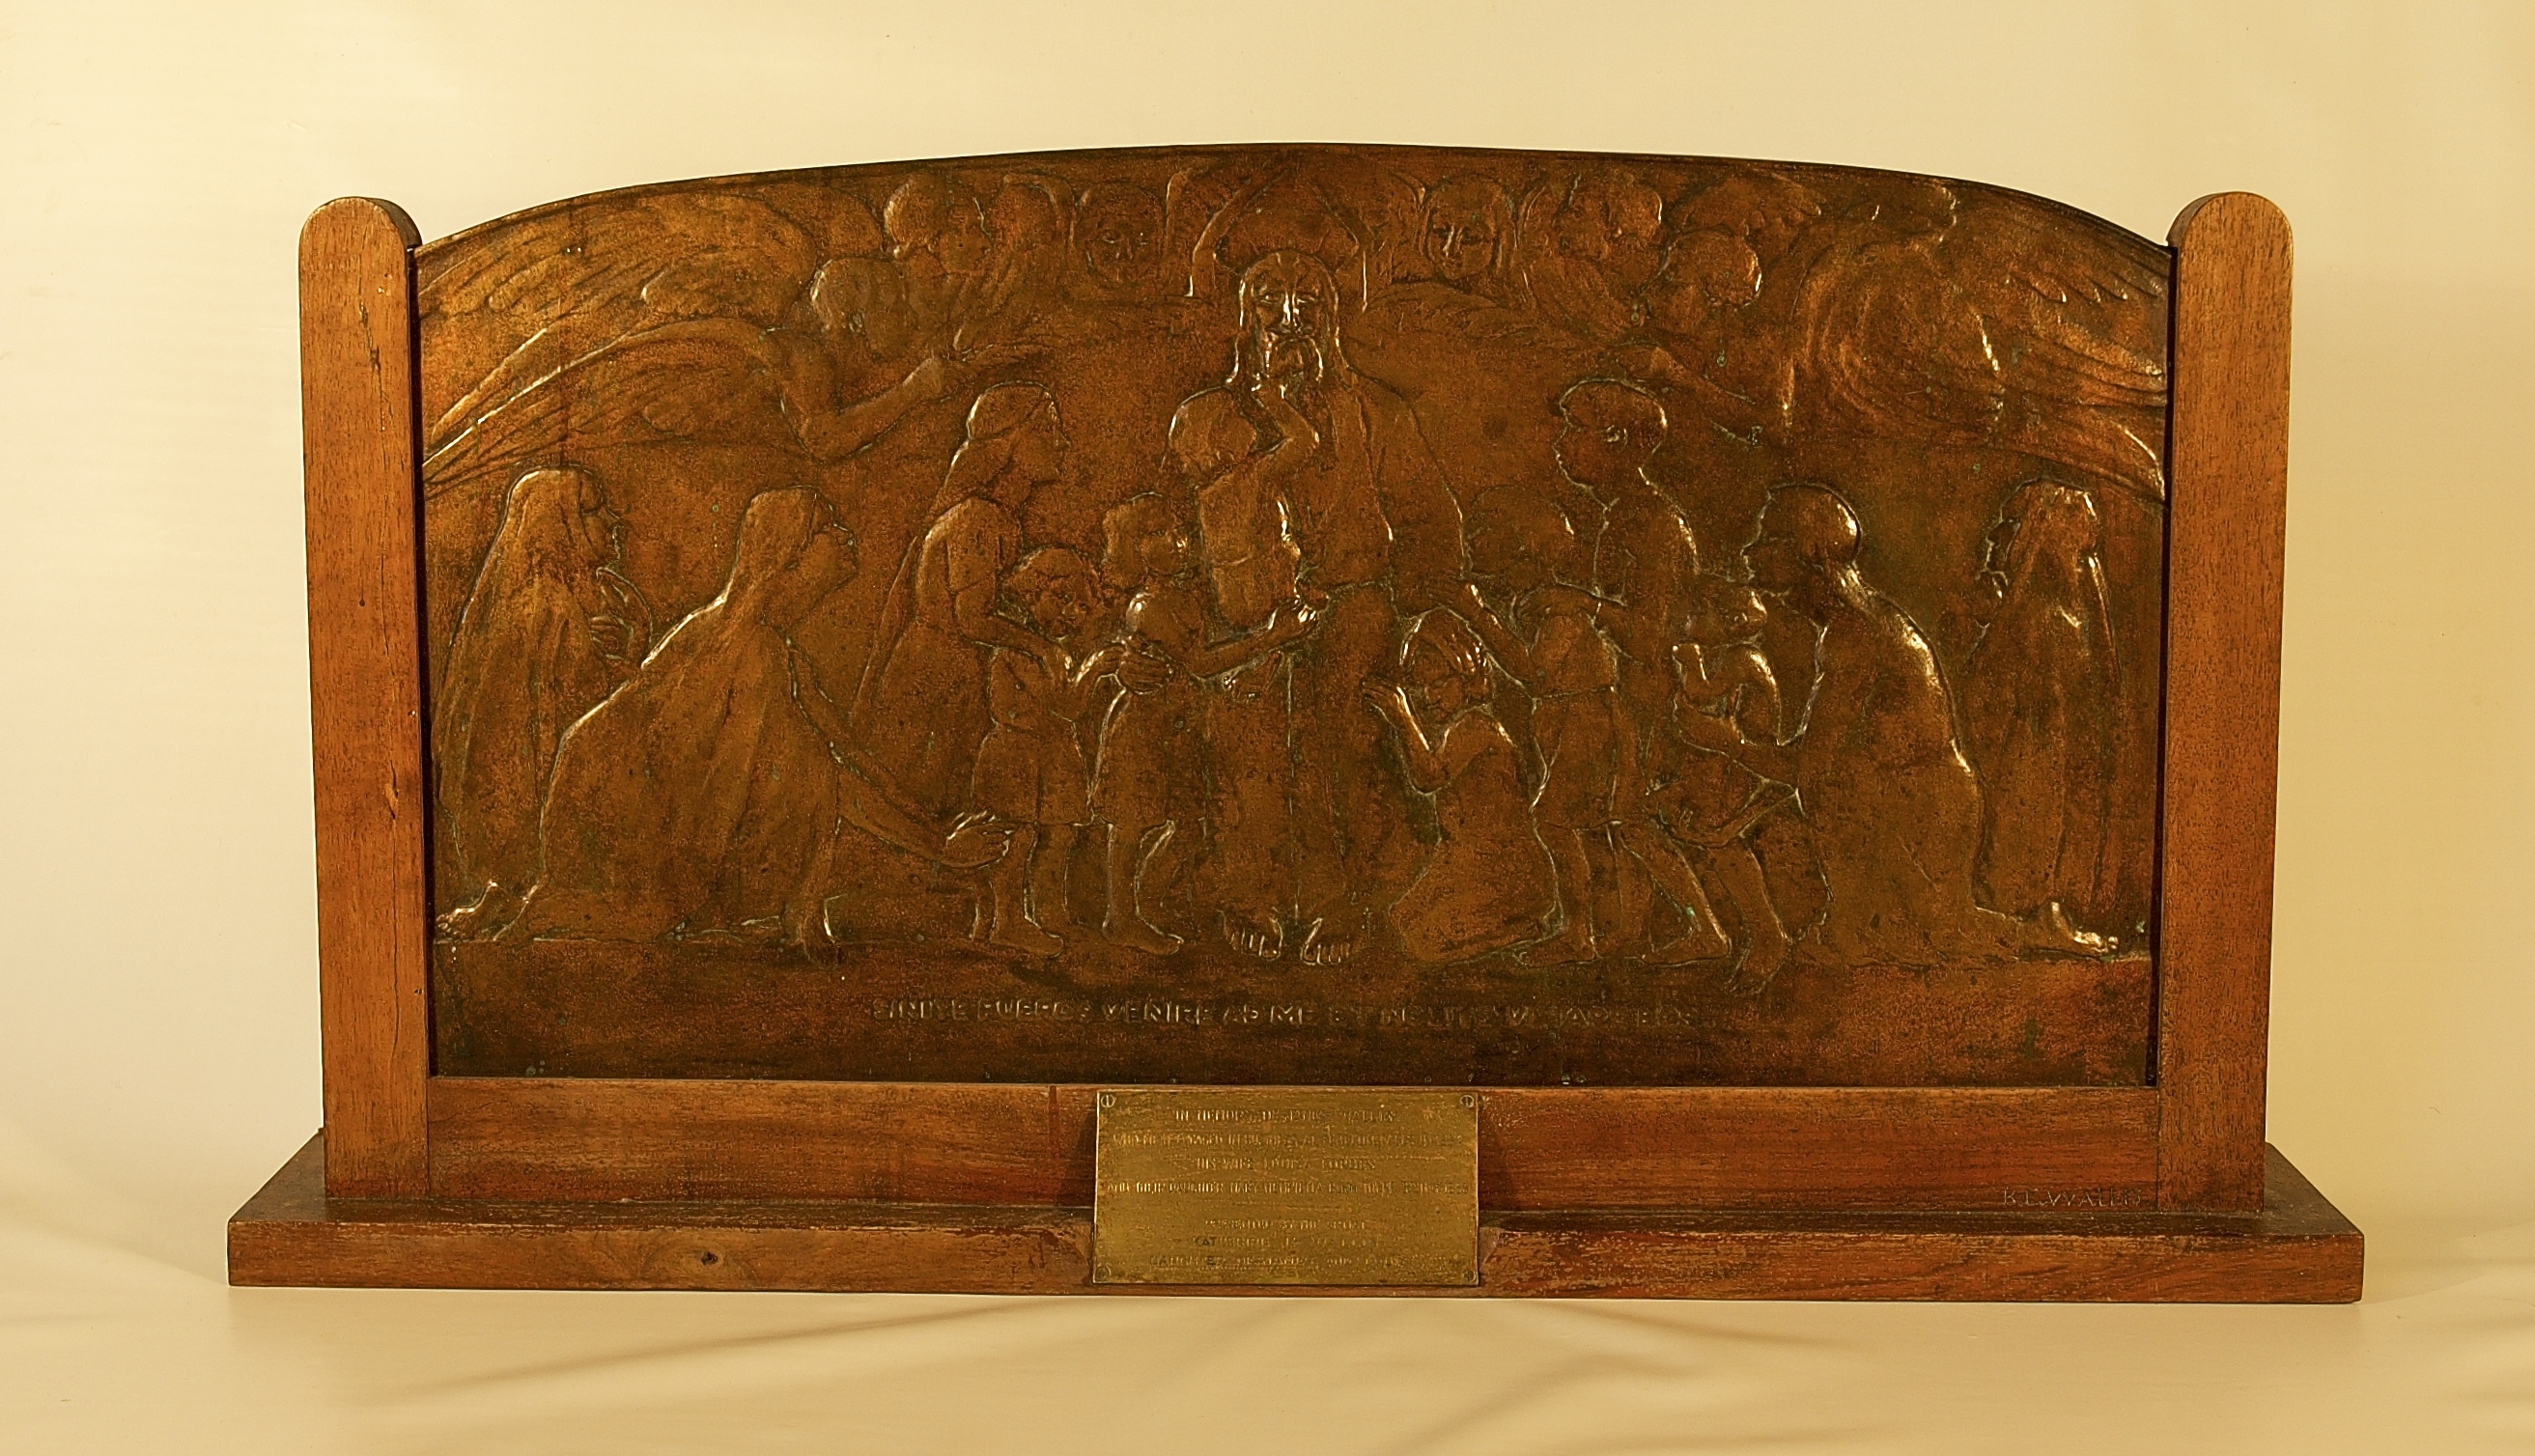 A bass engraved plaque showing Jesus surrounded by children and flanked by two angels.